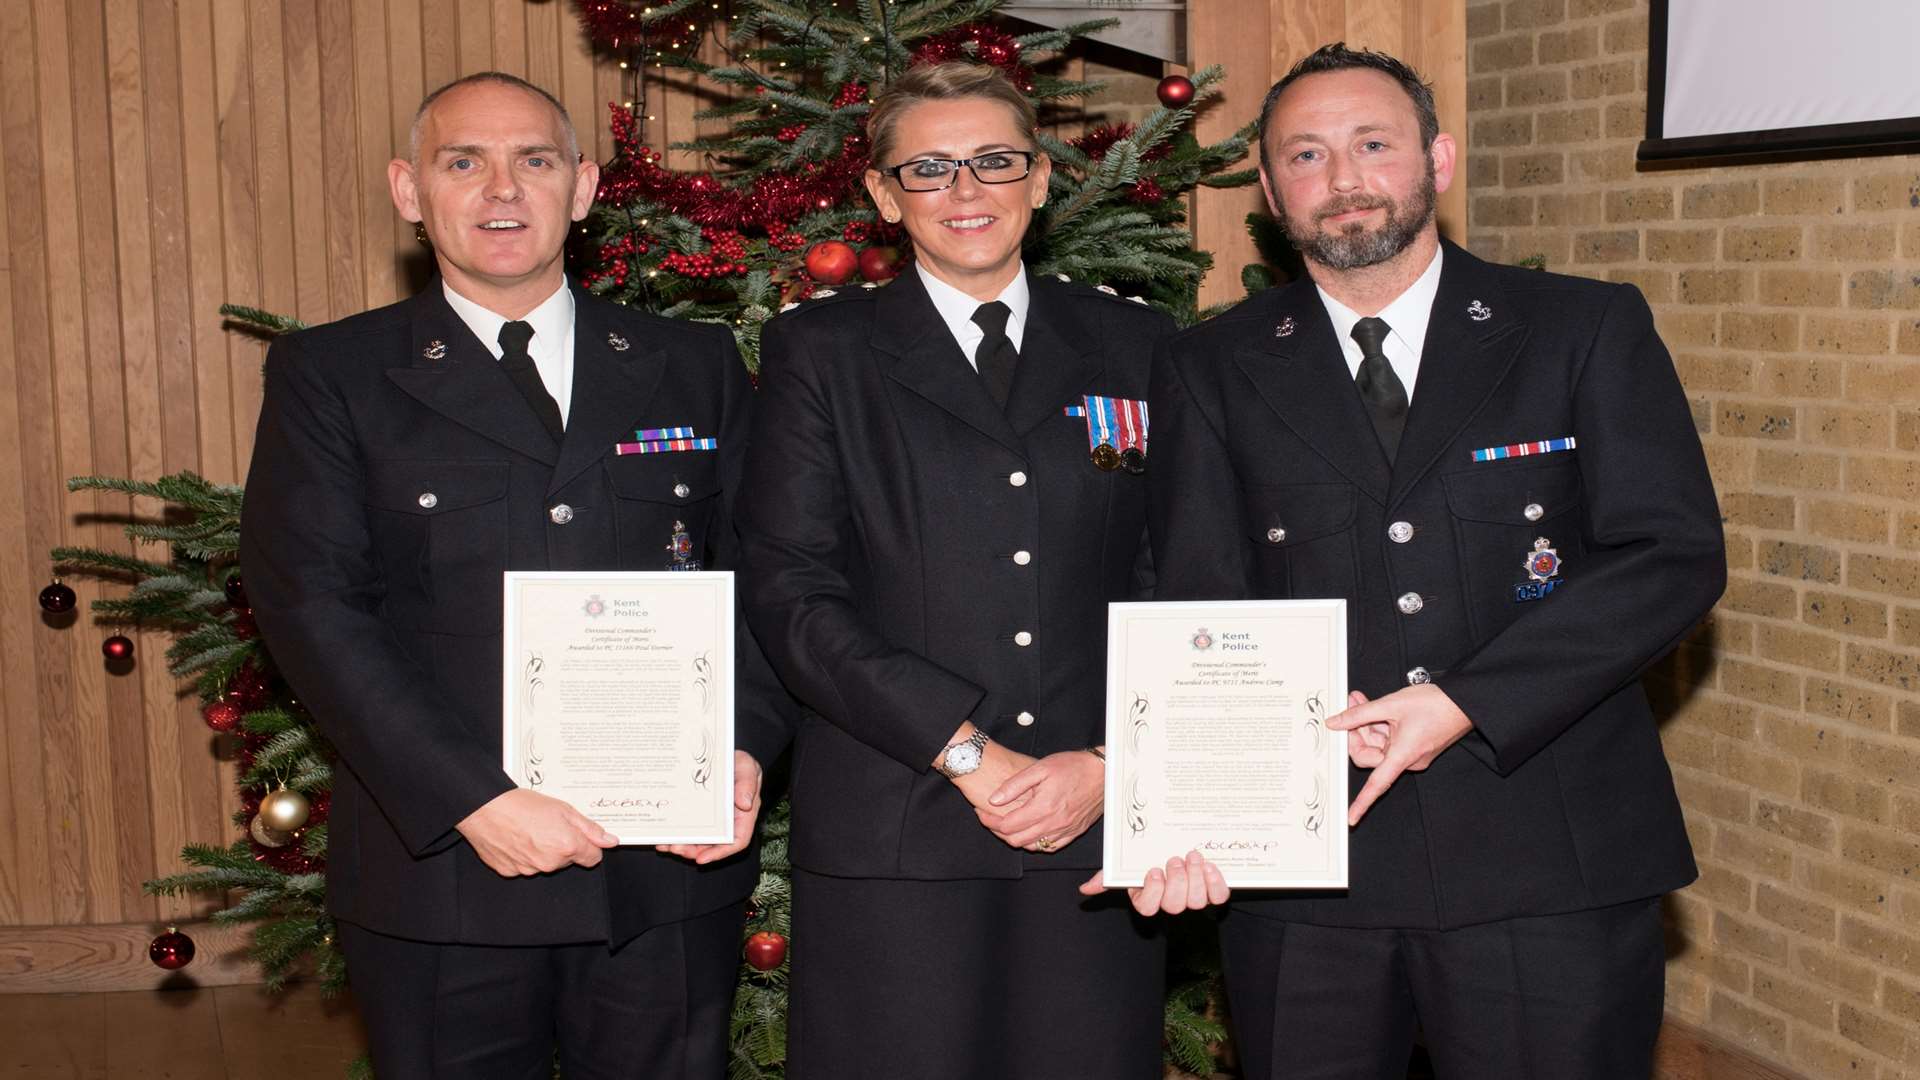 PC Paul Dormer and PC Andrew Camp with chief superintendent Andrea Bishop.